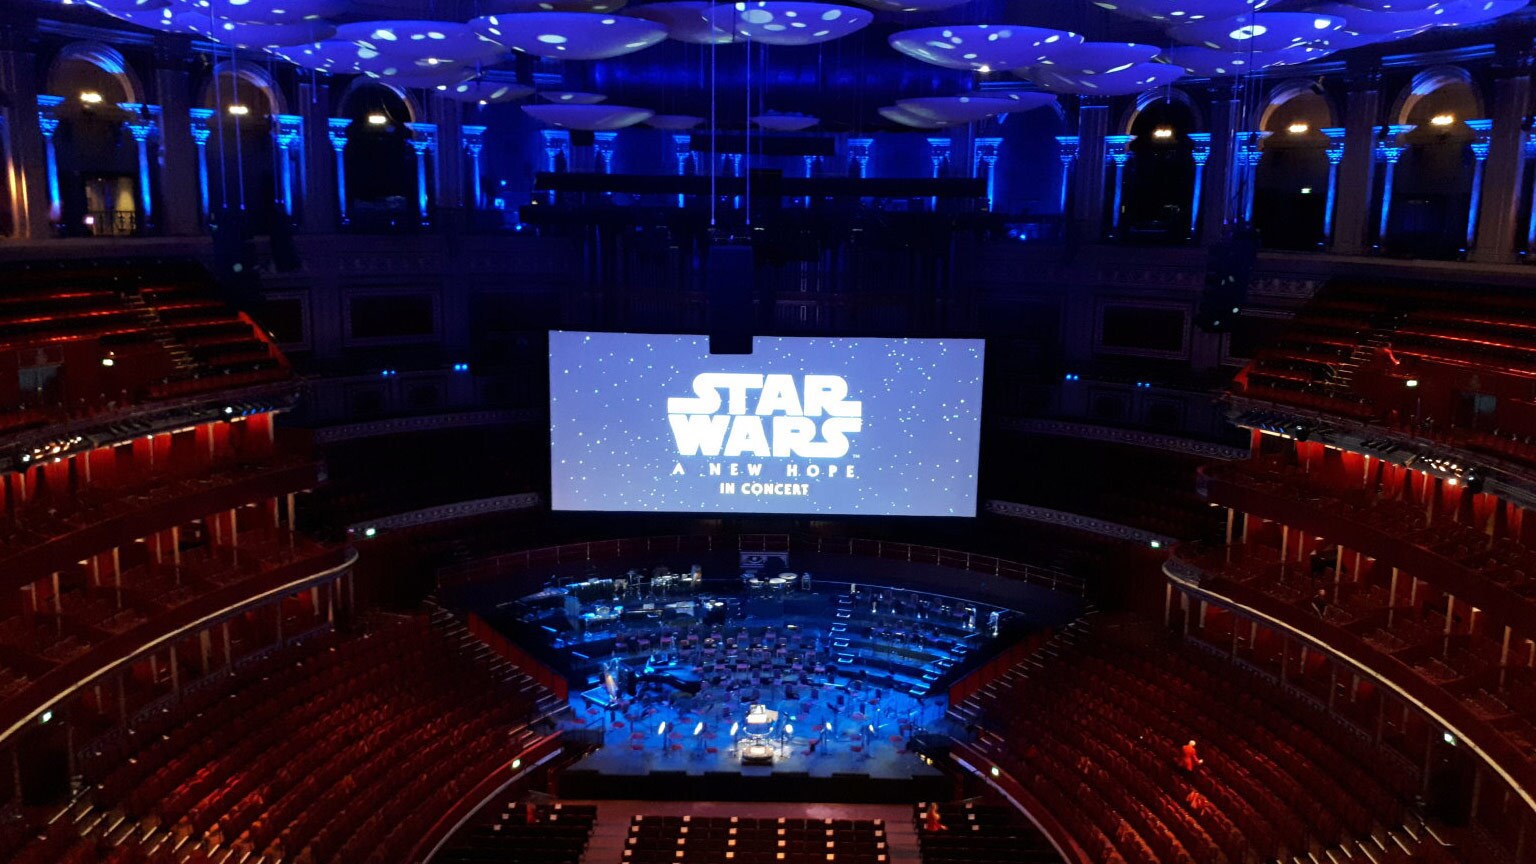 7 Behind-The-Scenes Insights of the Star Wars Film Concert Series